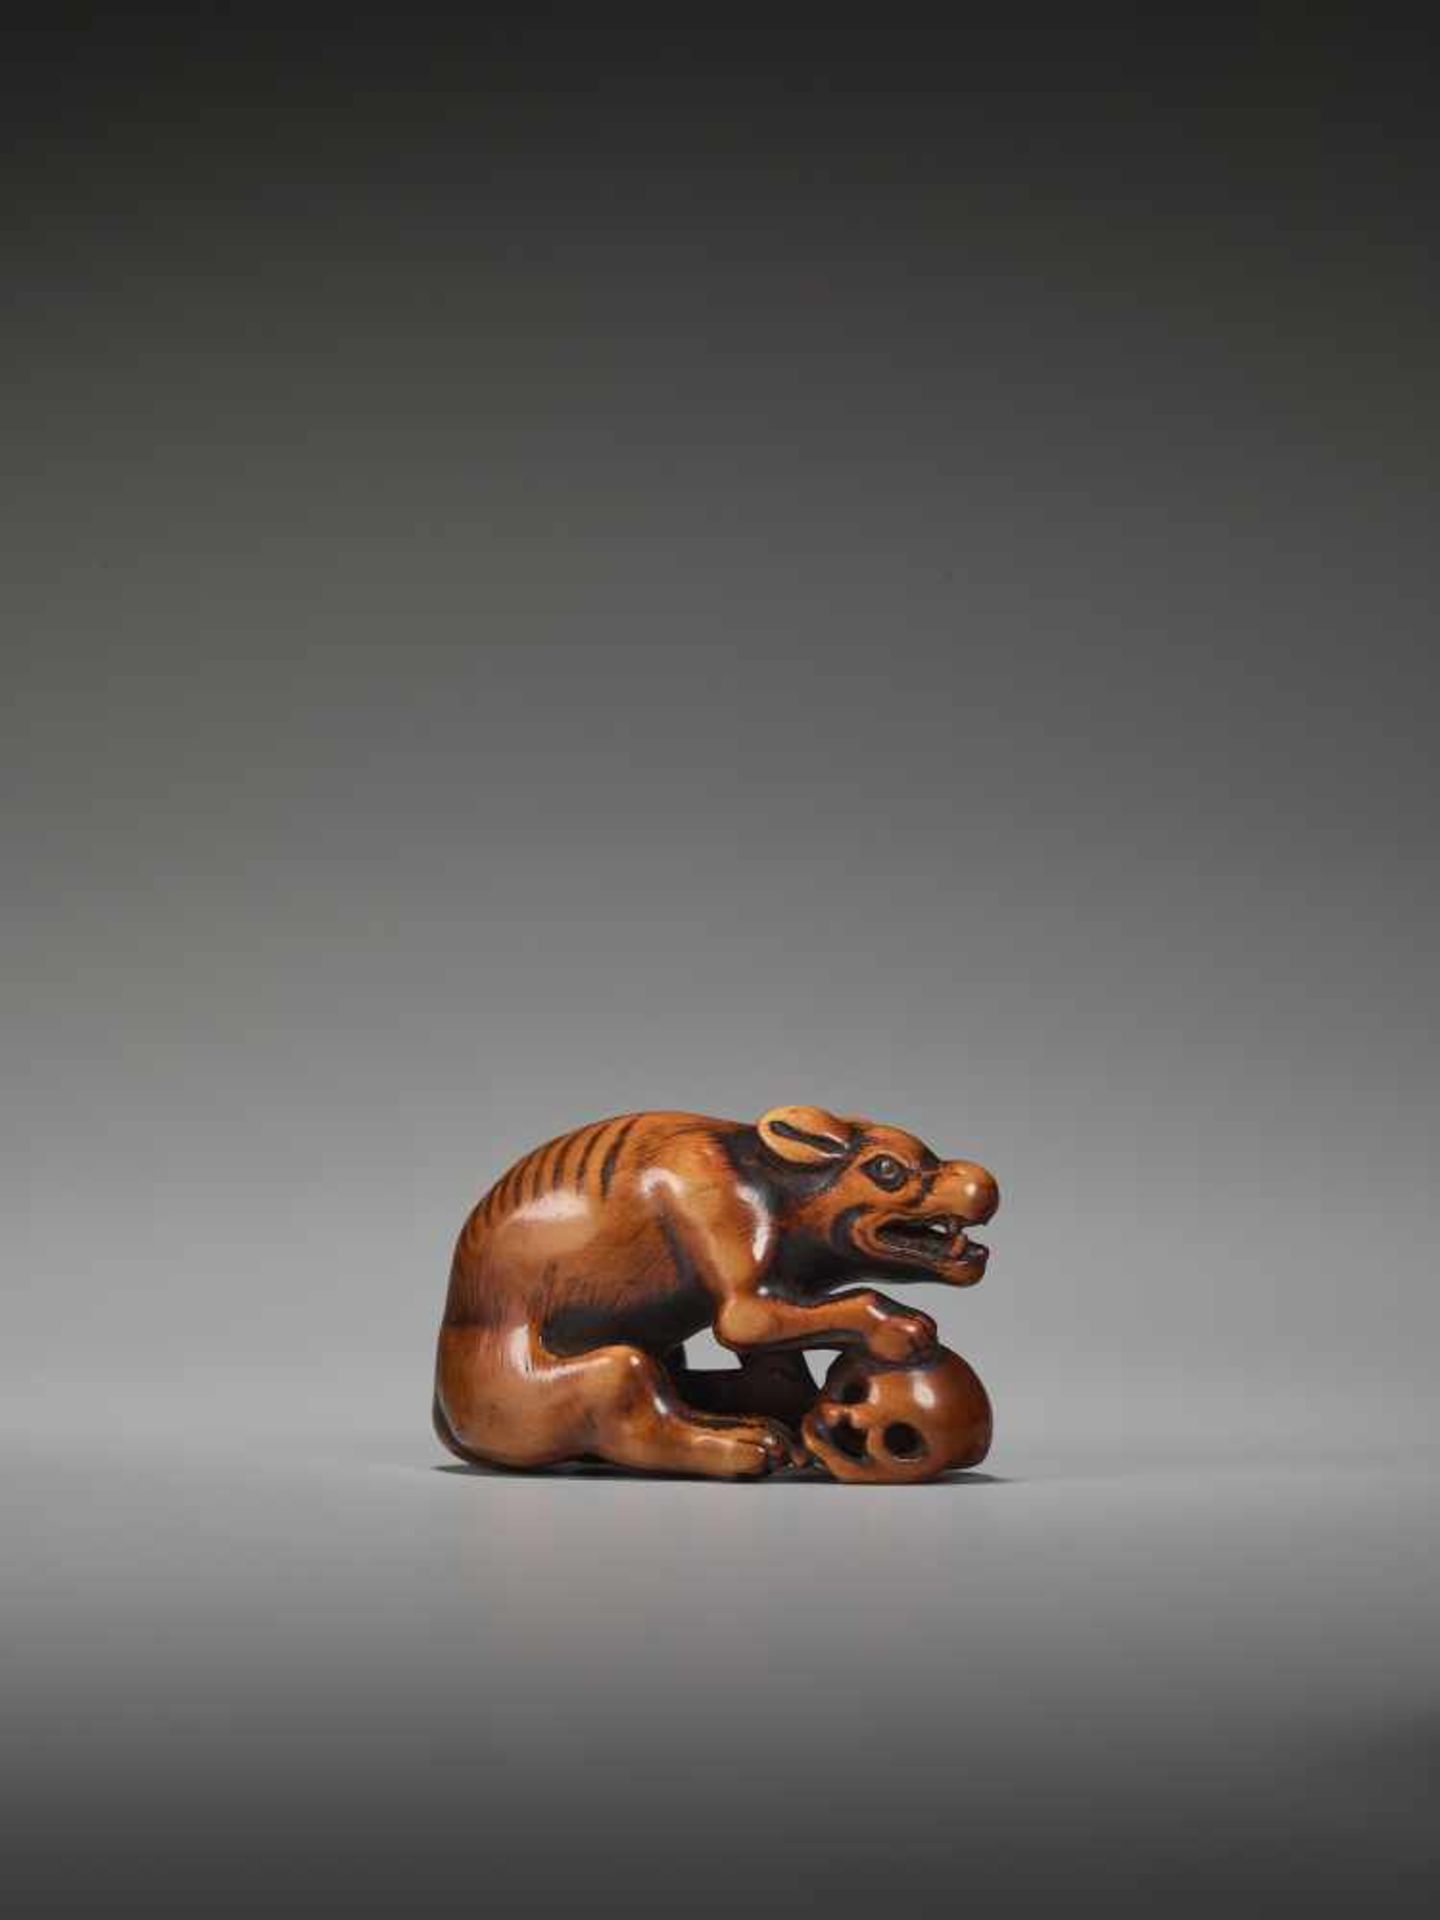 A POWERFUL WOOD NETSUKE OF A WOLF WITH A SKULL UnsignedJapan, 18th century, Edo period (1615-1868) - Image 5 of 9